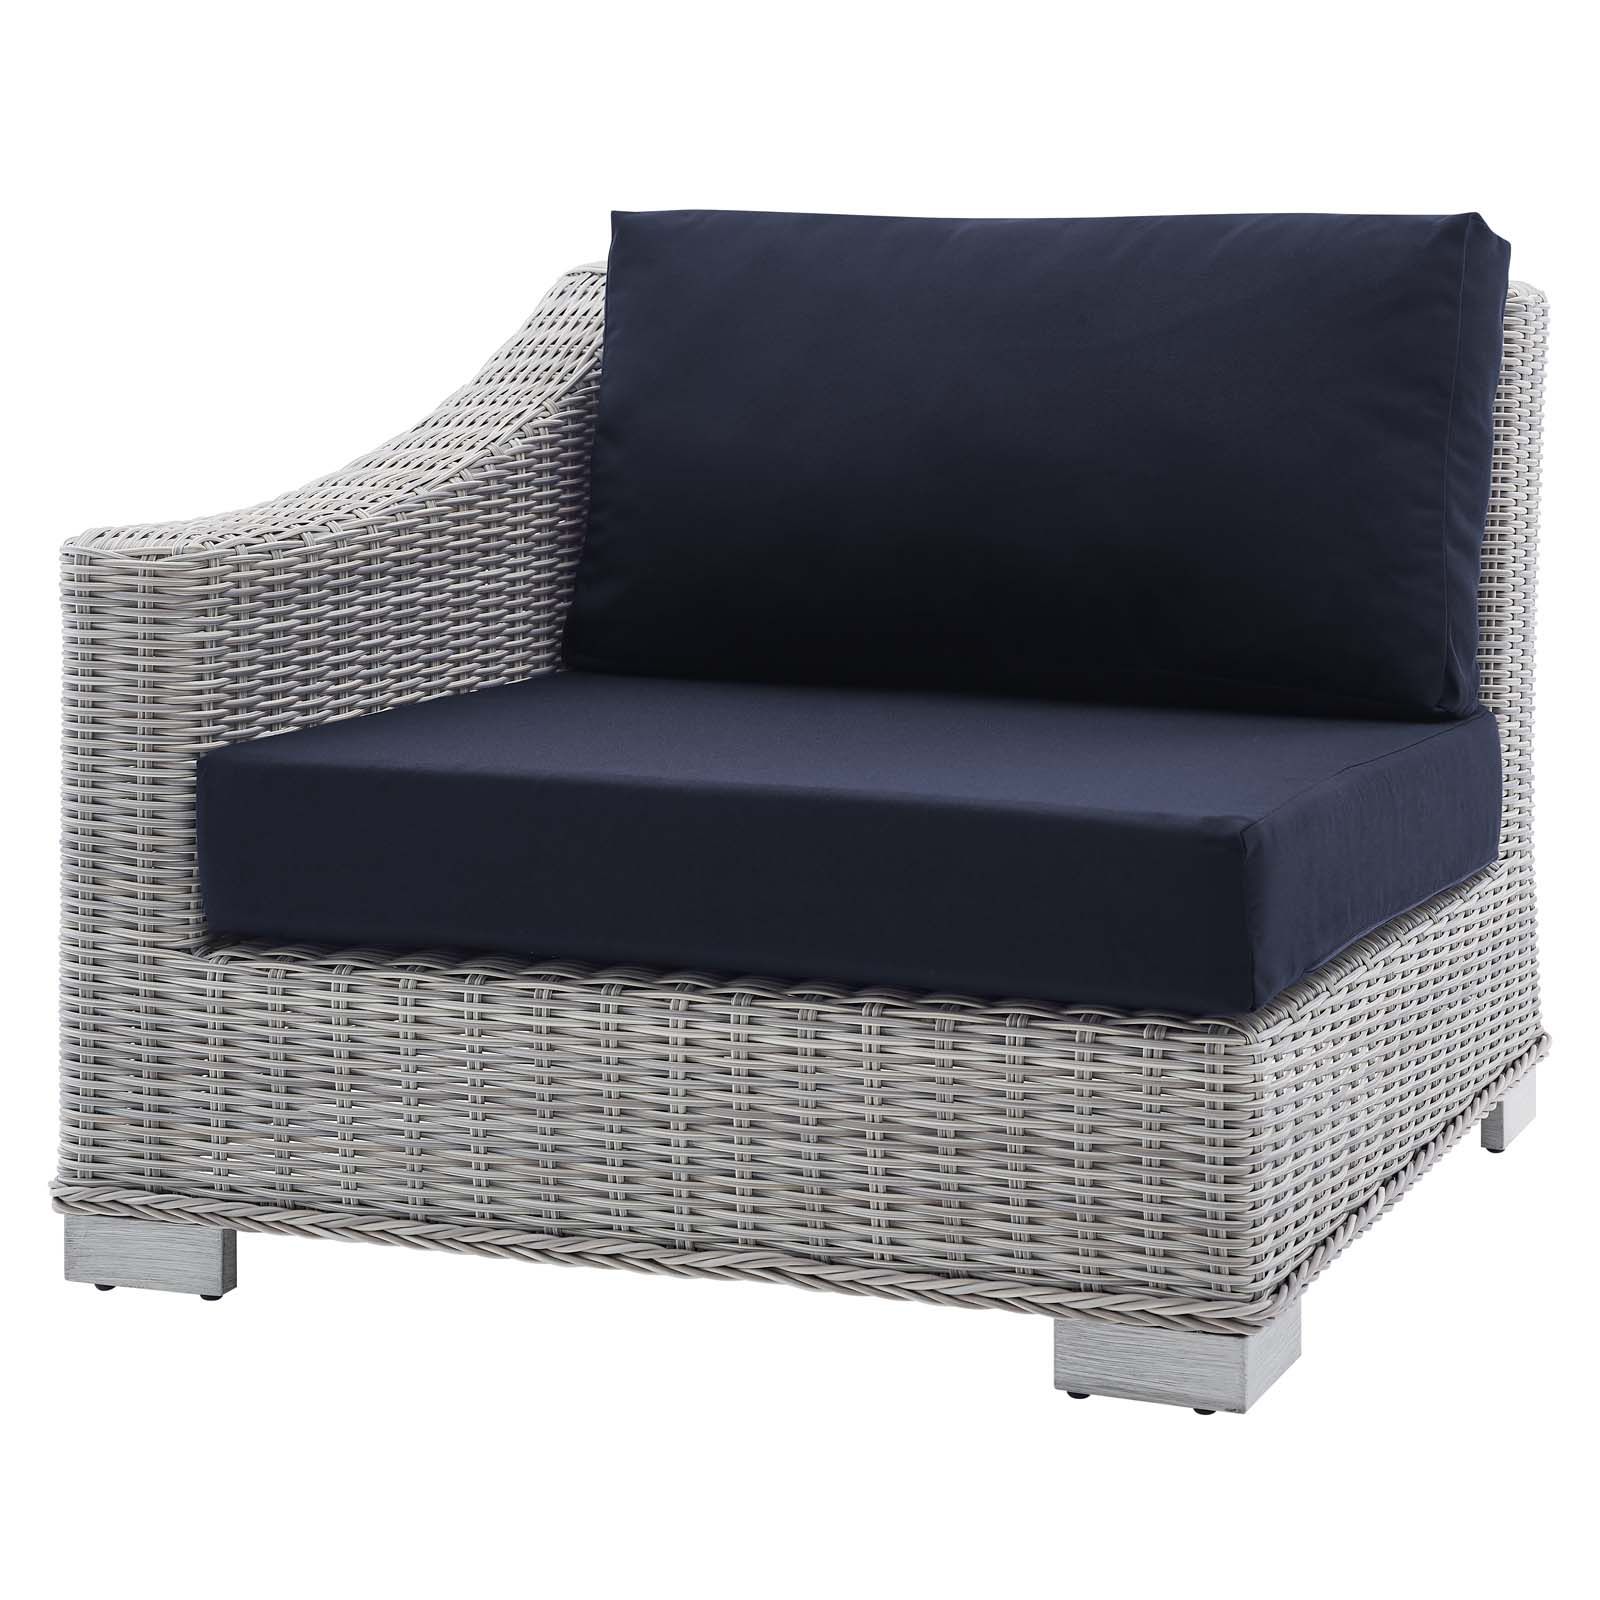 Fabric Outdoor Wicker Armchairs For Well Liked Conway Outdoor Patio Wicker Rattan Right Arm Chair Light Gray Navy (View 8 of 15)